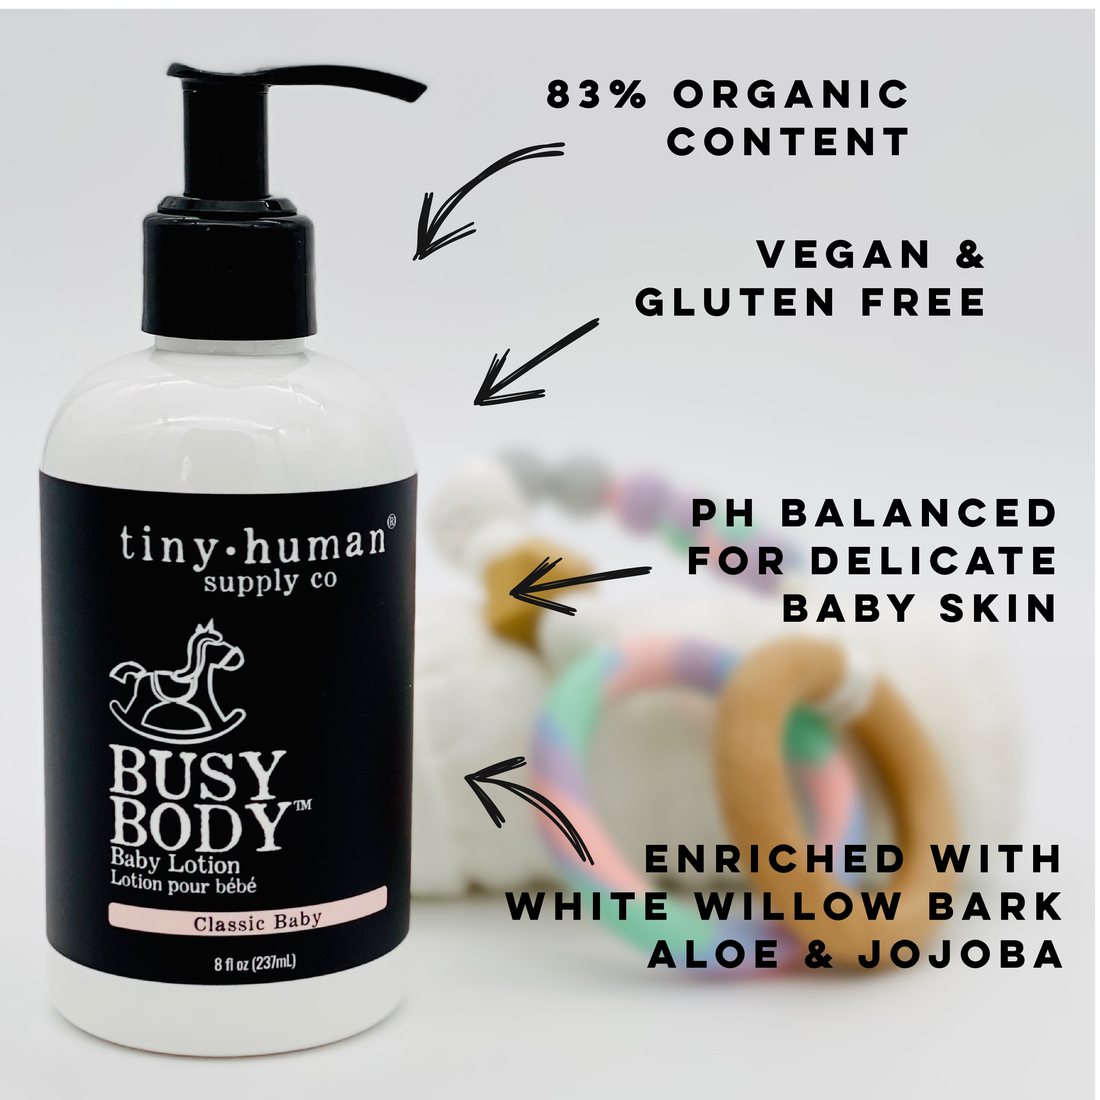 Busy Body Baby Lotion - Fragrance Free